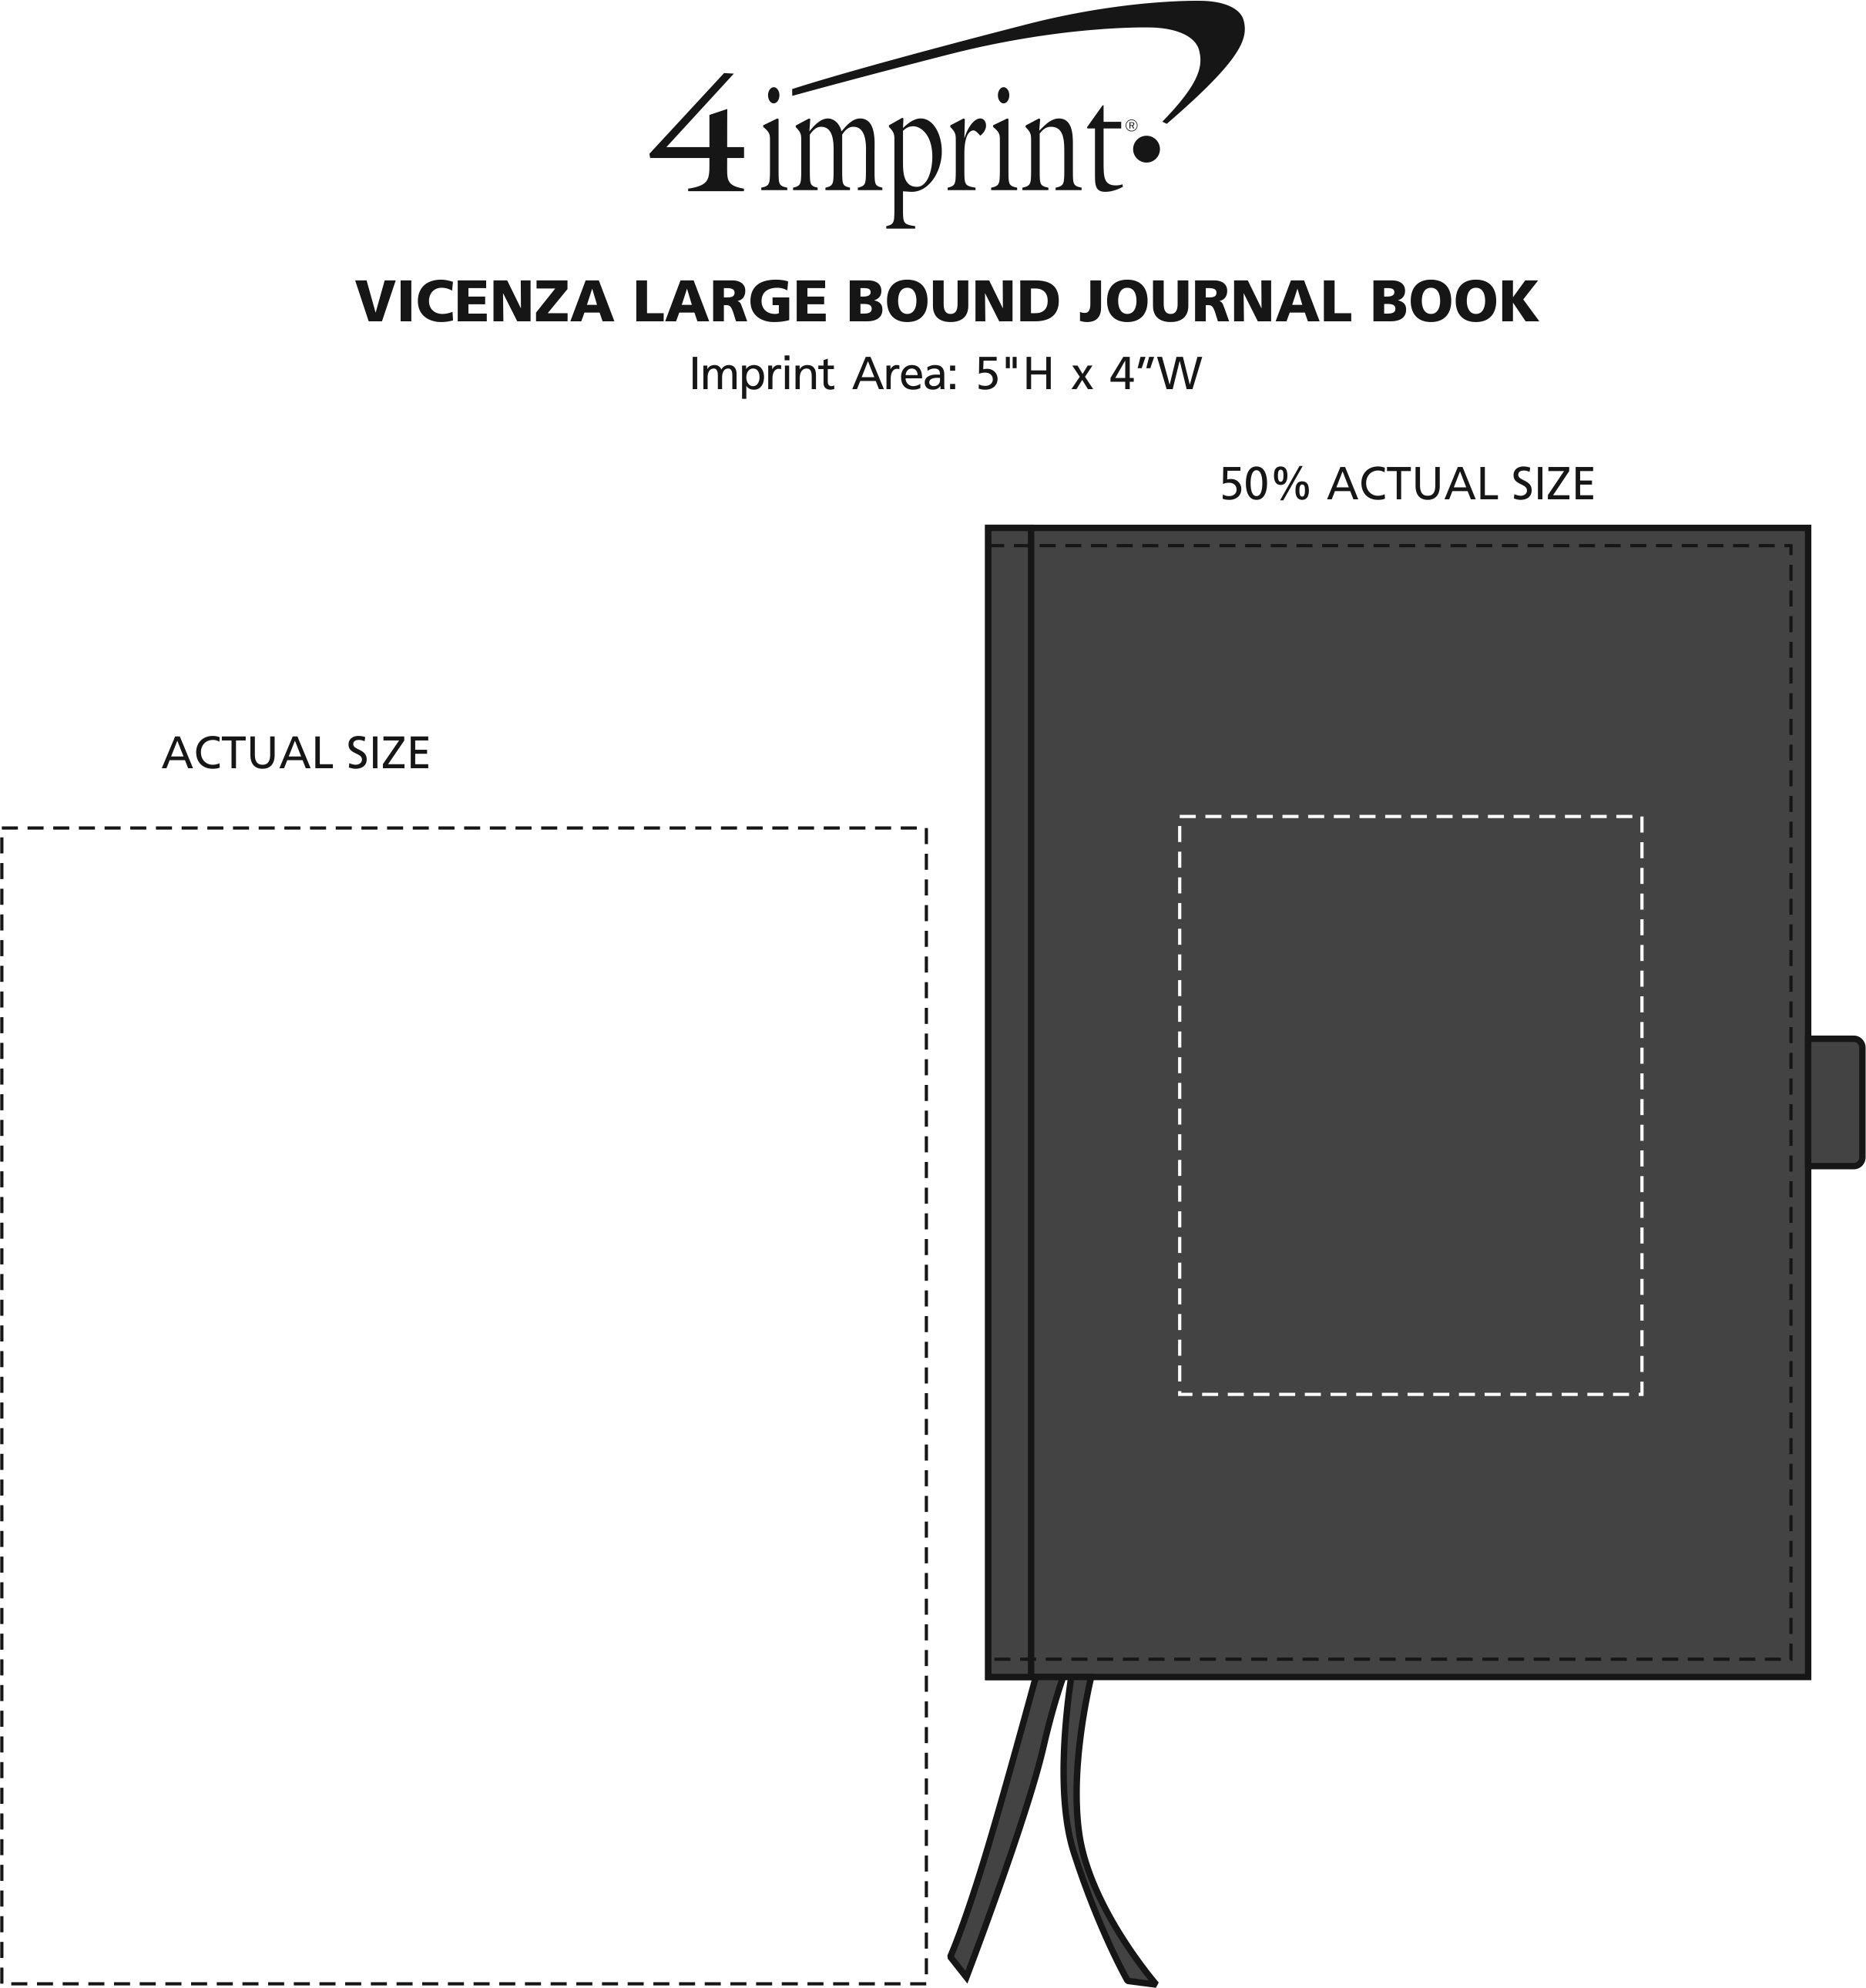 Imprint Area of Vicenza Large Bound Journal Book